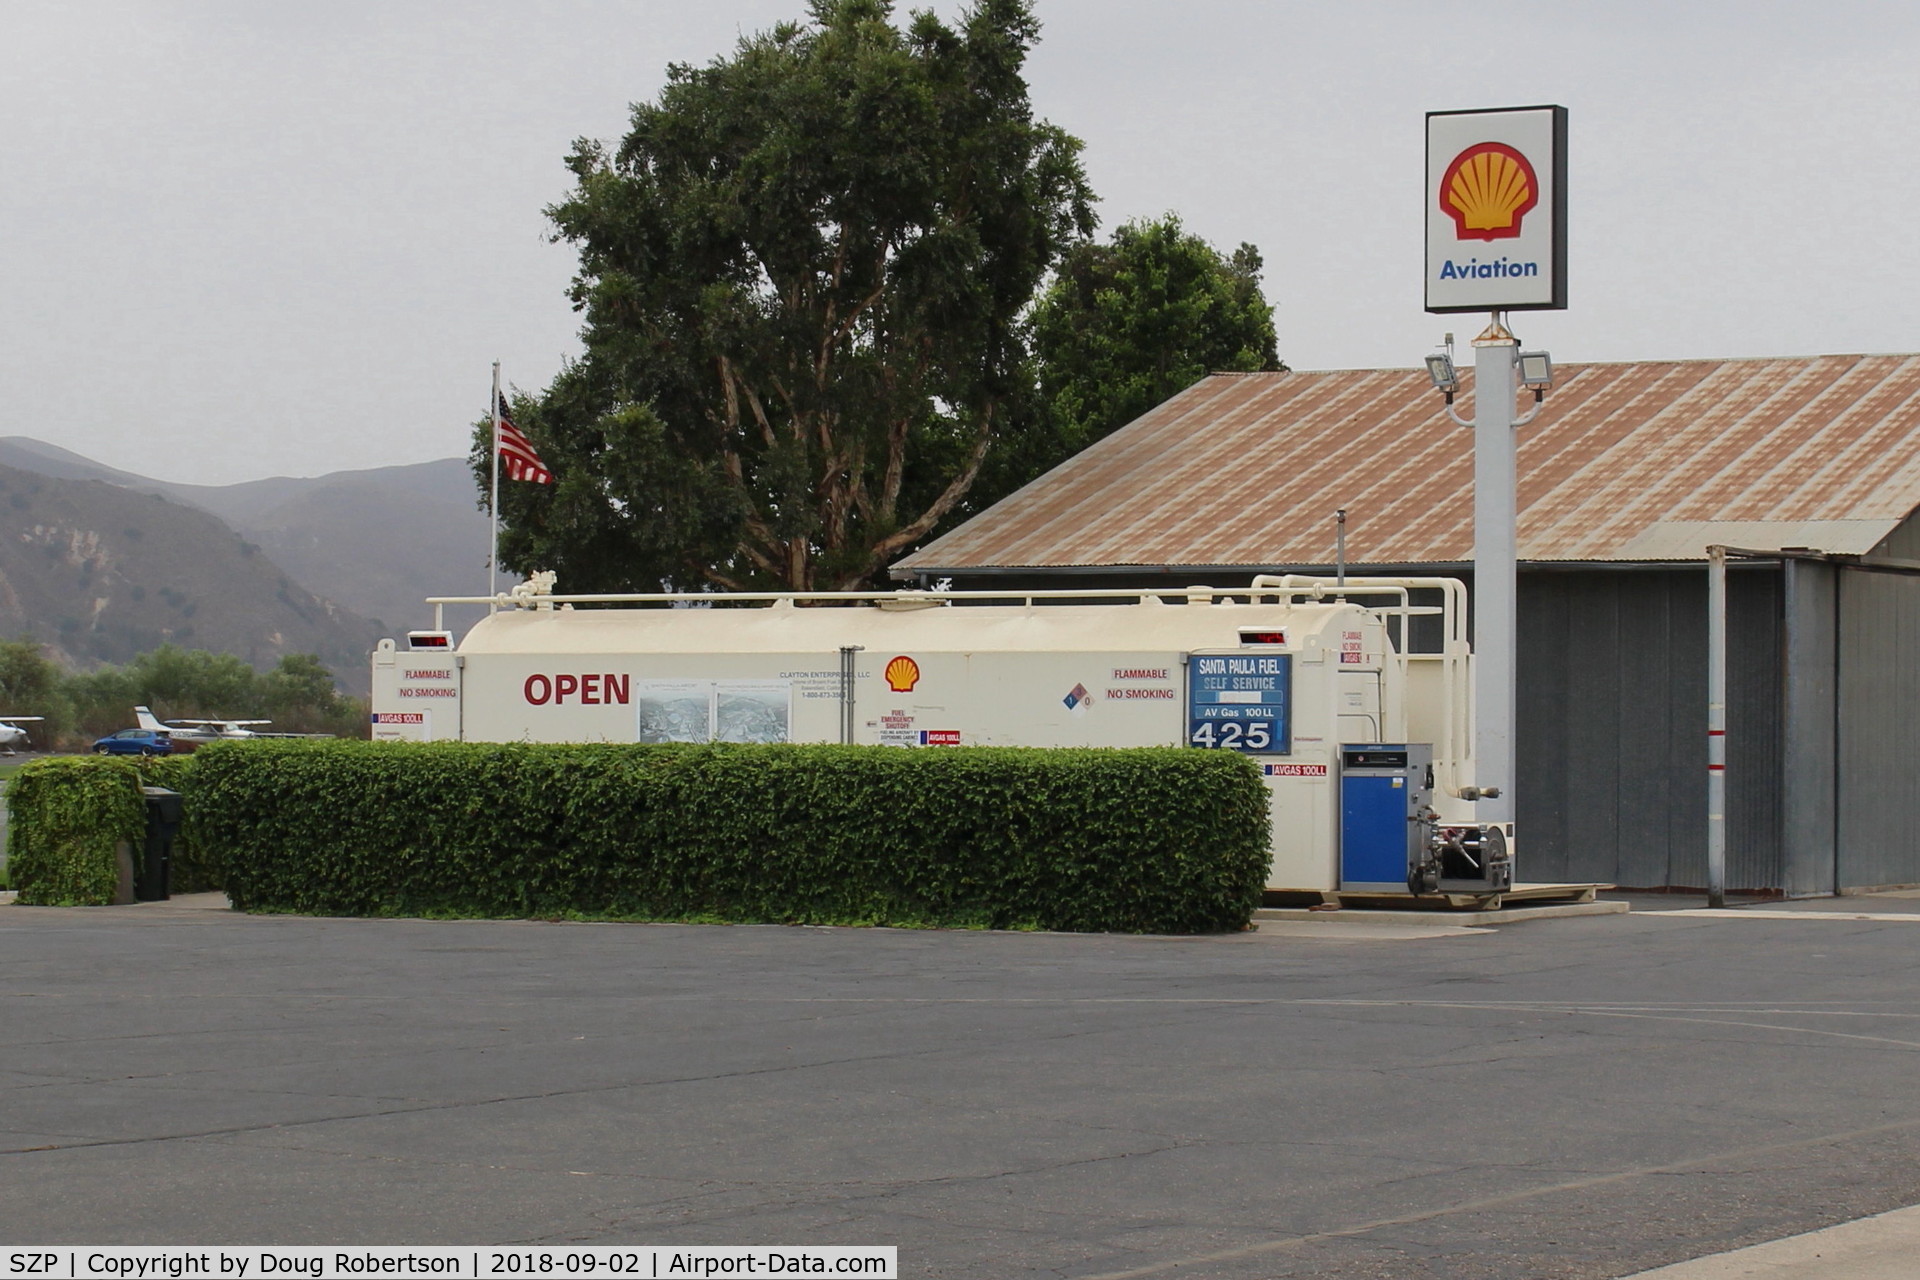 Santa Paula Airport (SZP) - Santa Paula Airport SHELL 100LL Self-Serve Fuel Dock, note lowered price